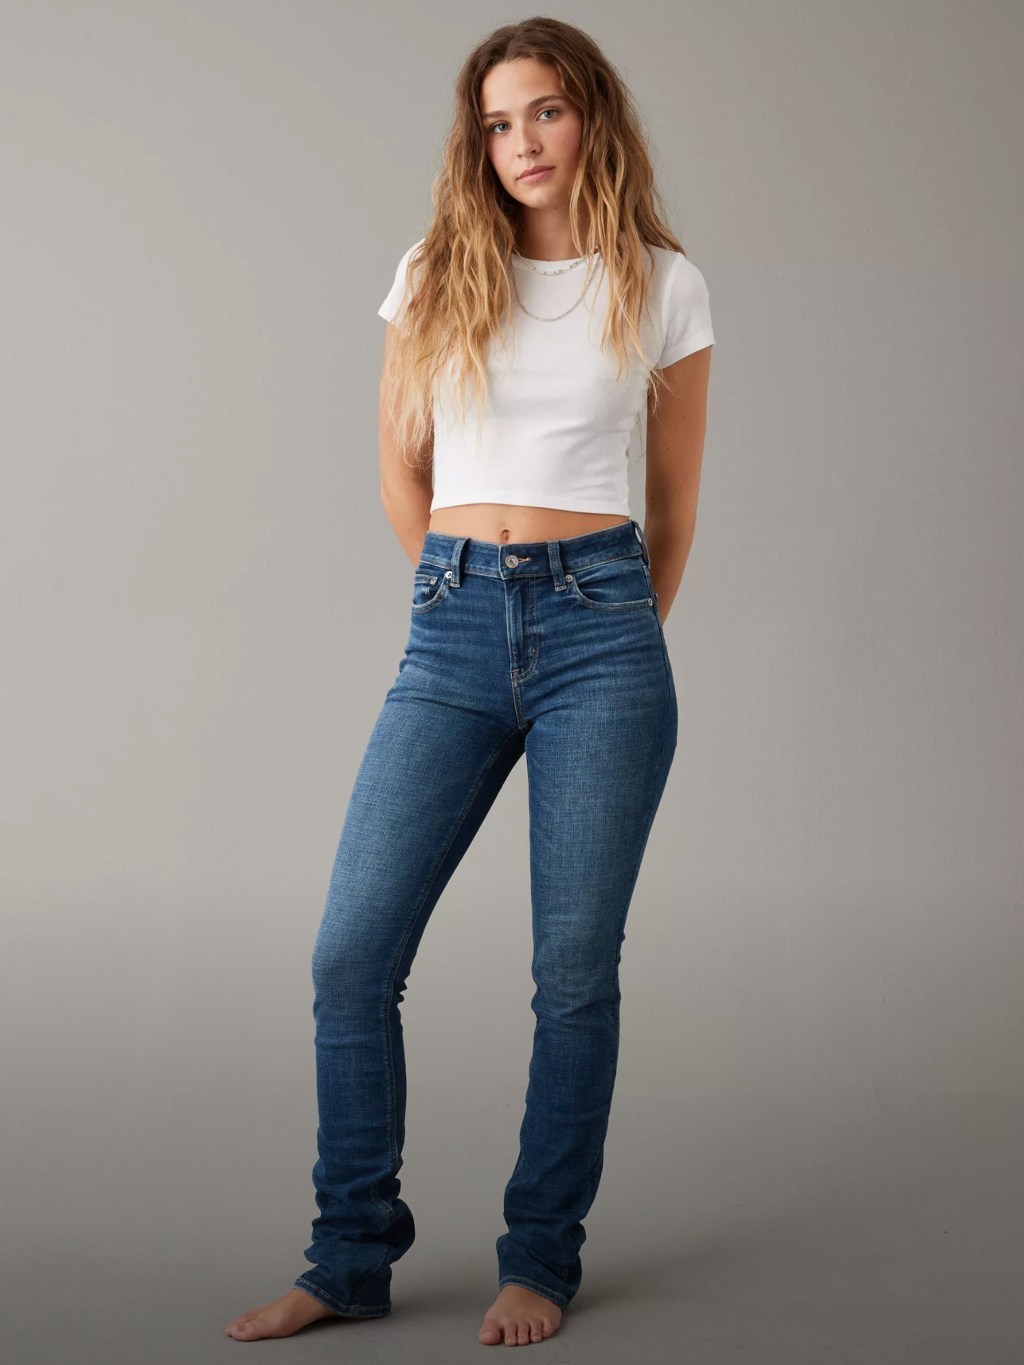 girl wearing a white tshirt and stacked jeans from American Eagle